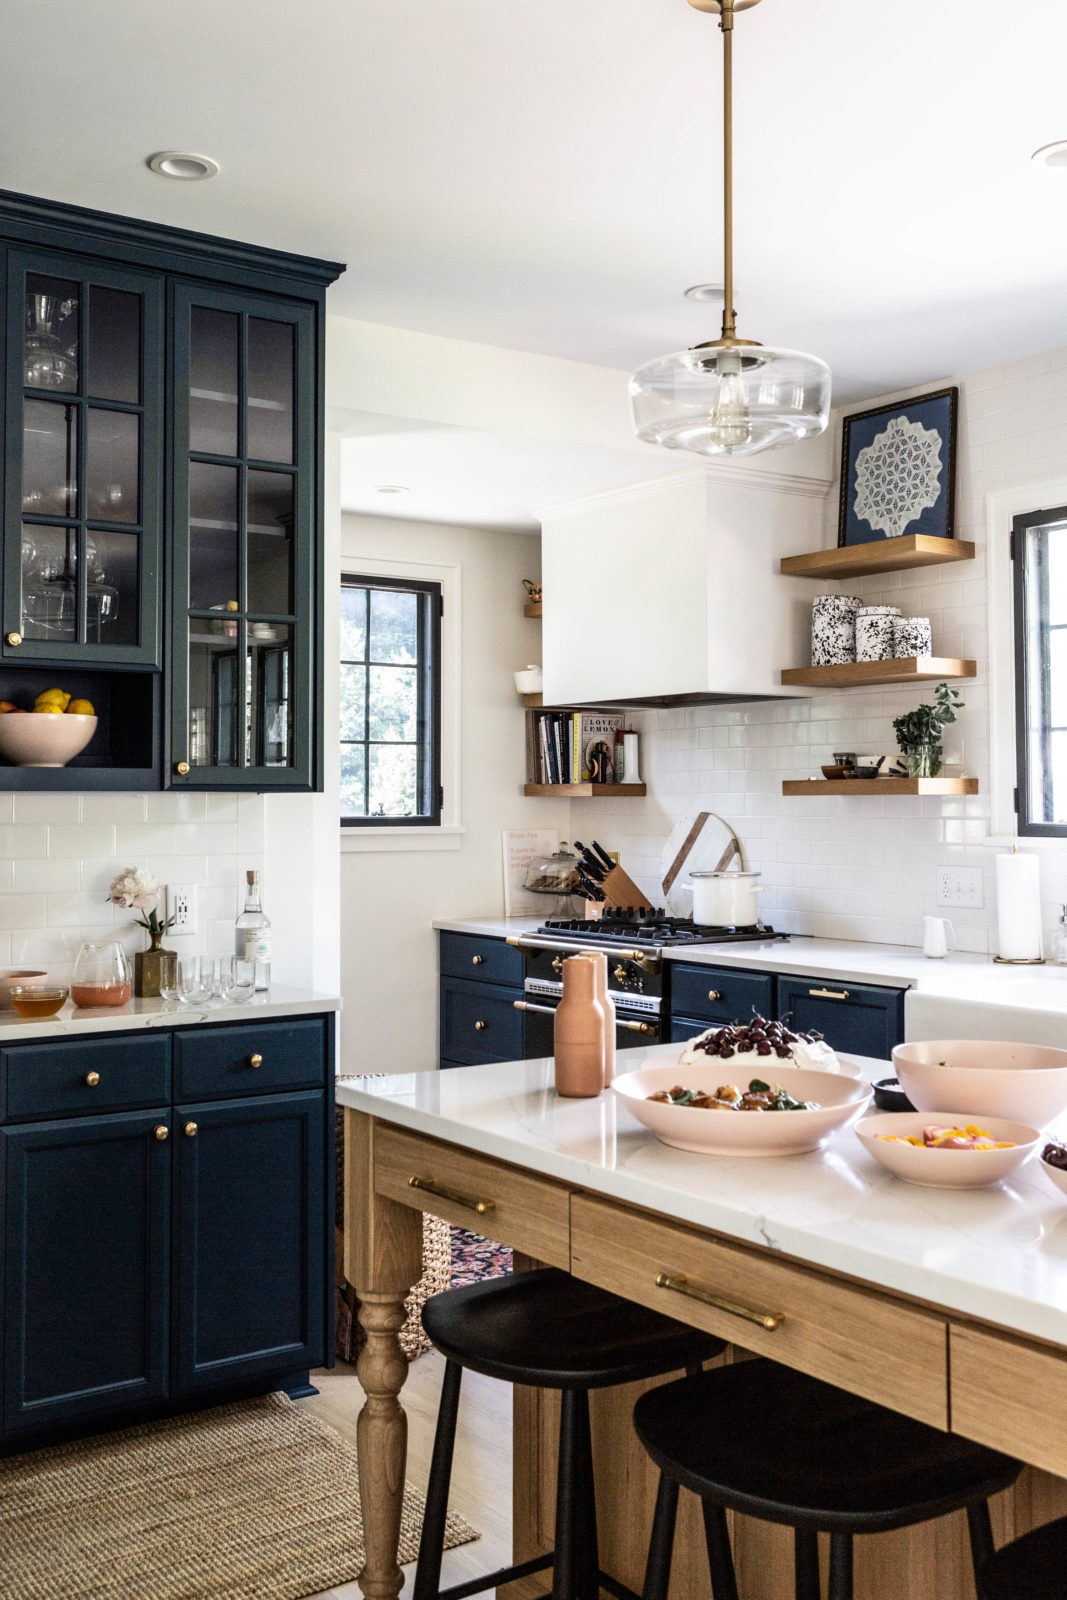 Kitchen Remodel Regrets and What I'd Do Differently Now